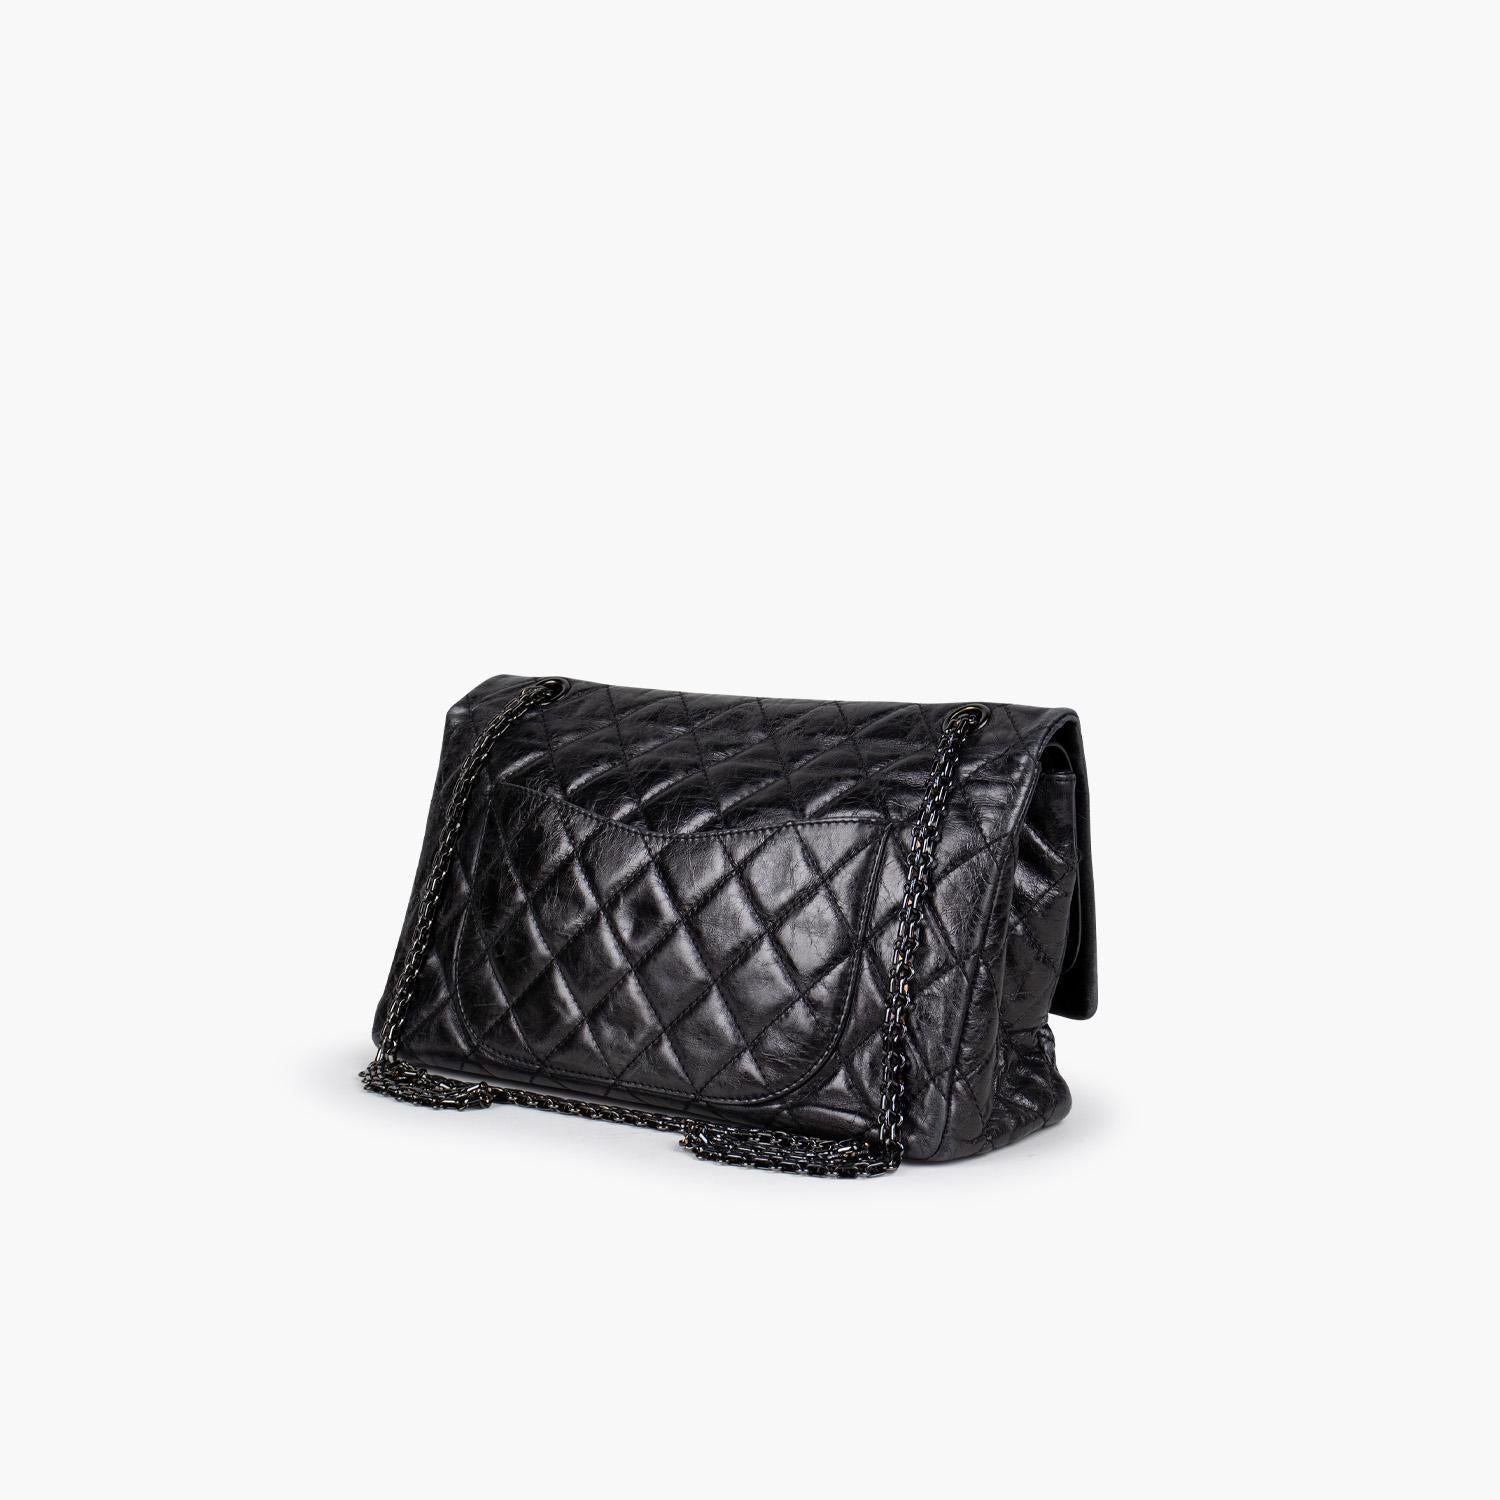 Chanel Reissue 227 Double Flap Bag In Good Condition For Sale In Sundbyberg, SE